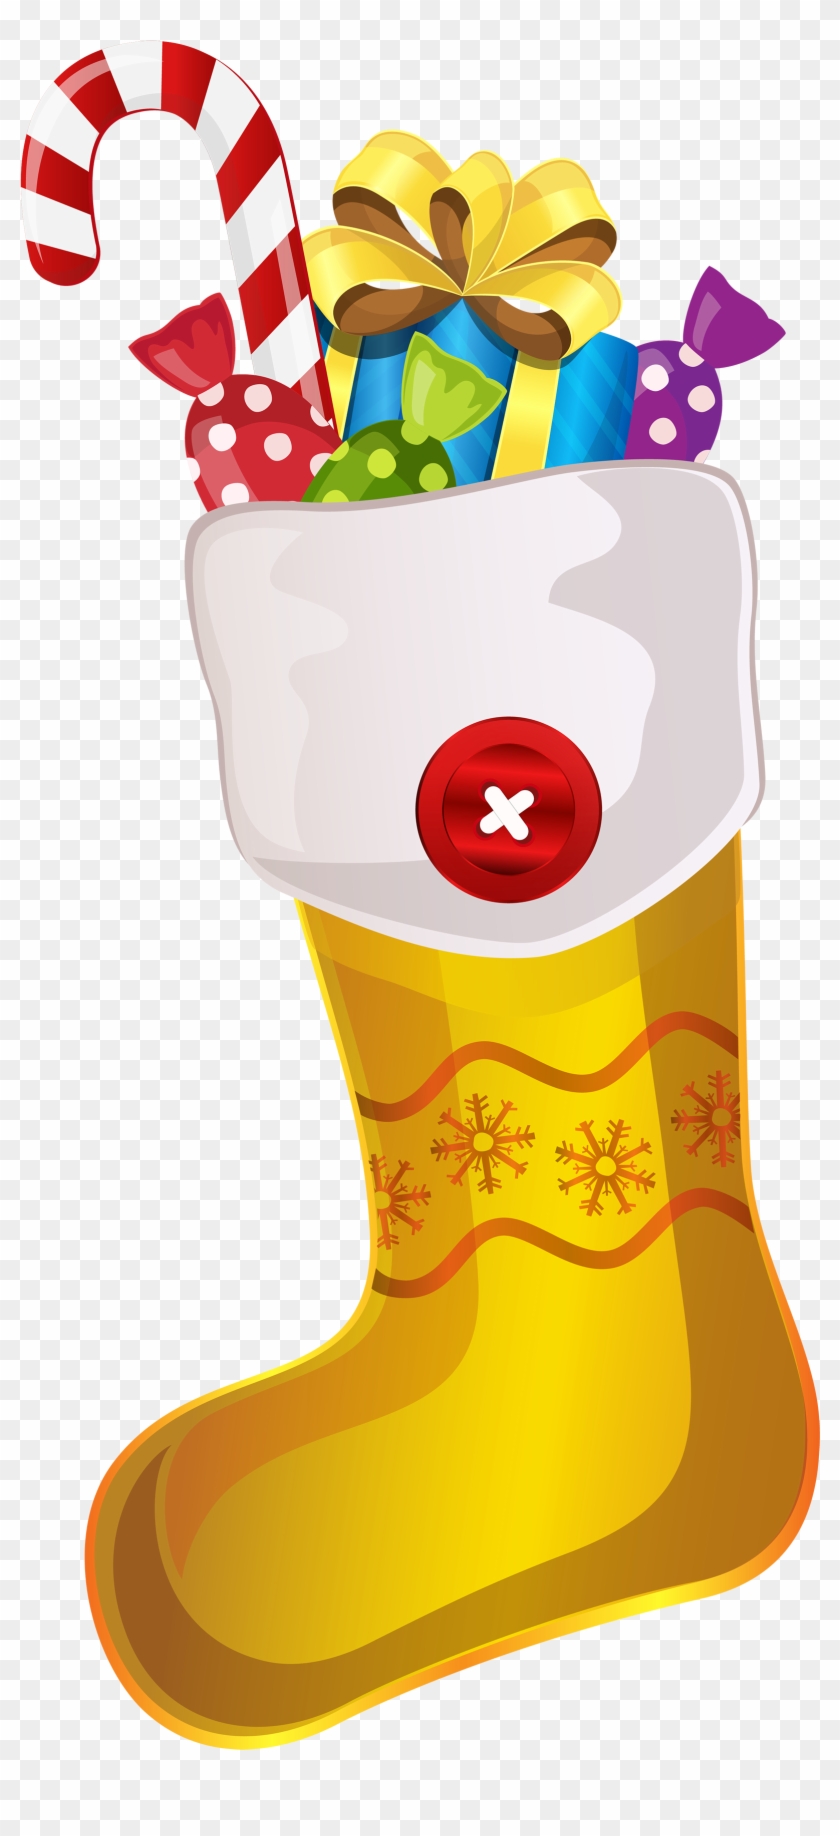 Christmas Yellow Stocking With Candy Cane Png Clipart - Green Christmas Socks Clipart Transparent Png #566070